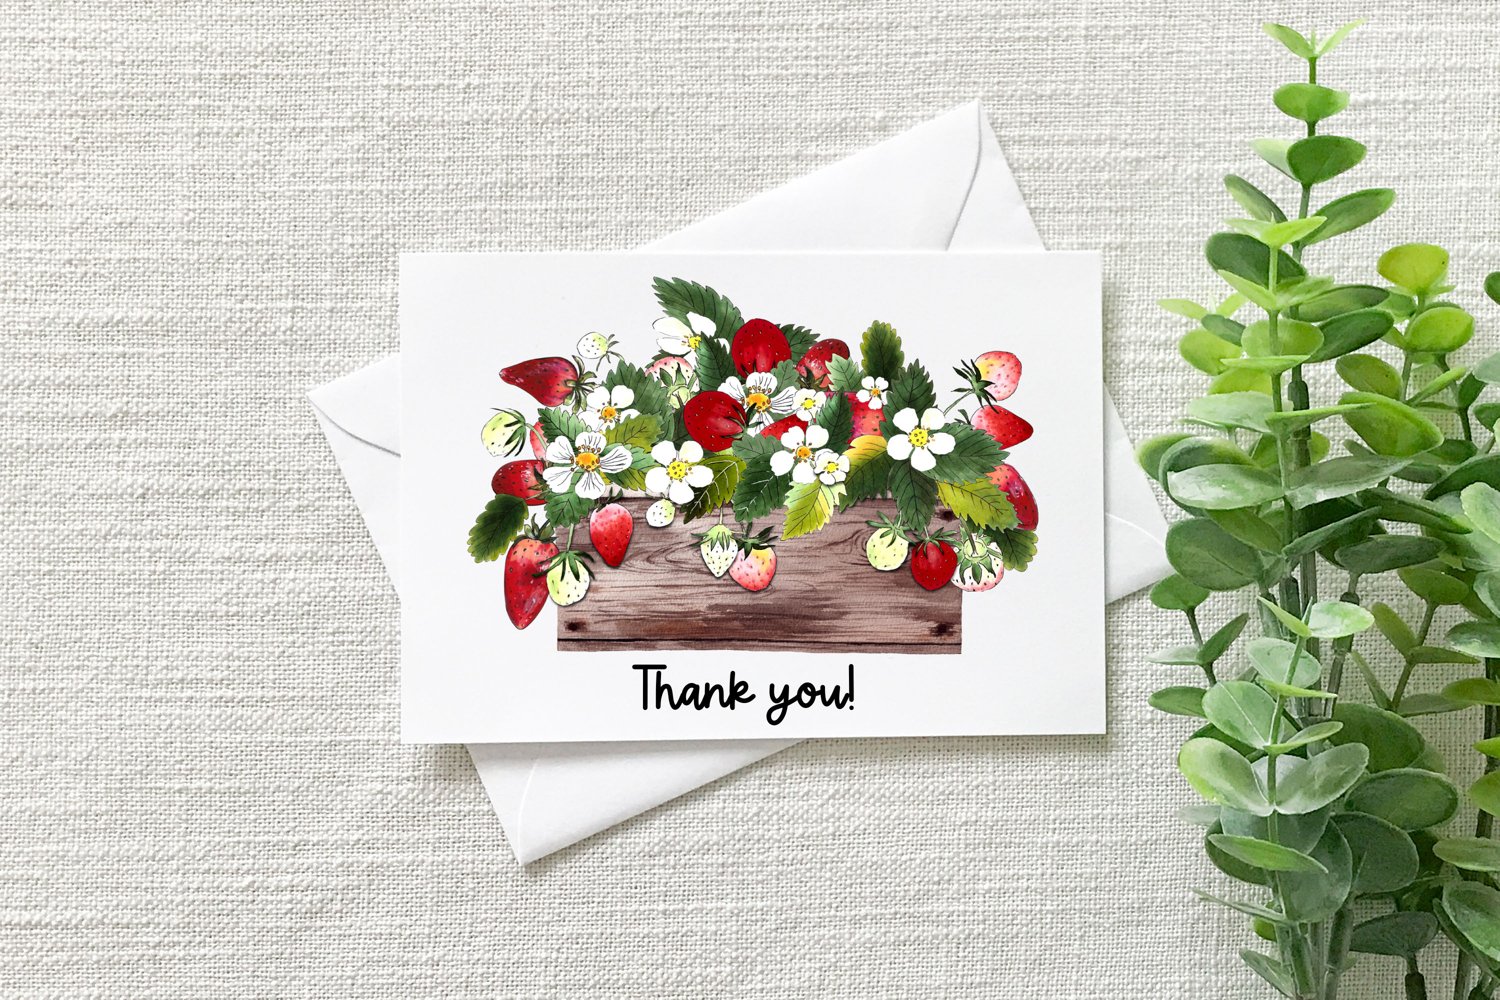 Beautiful card in white envelope and plant.